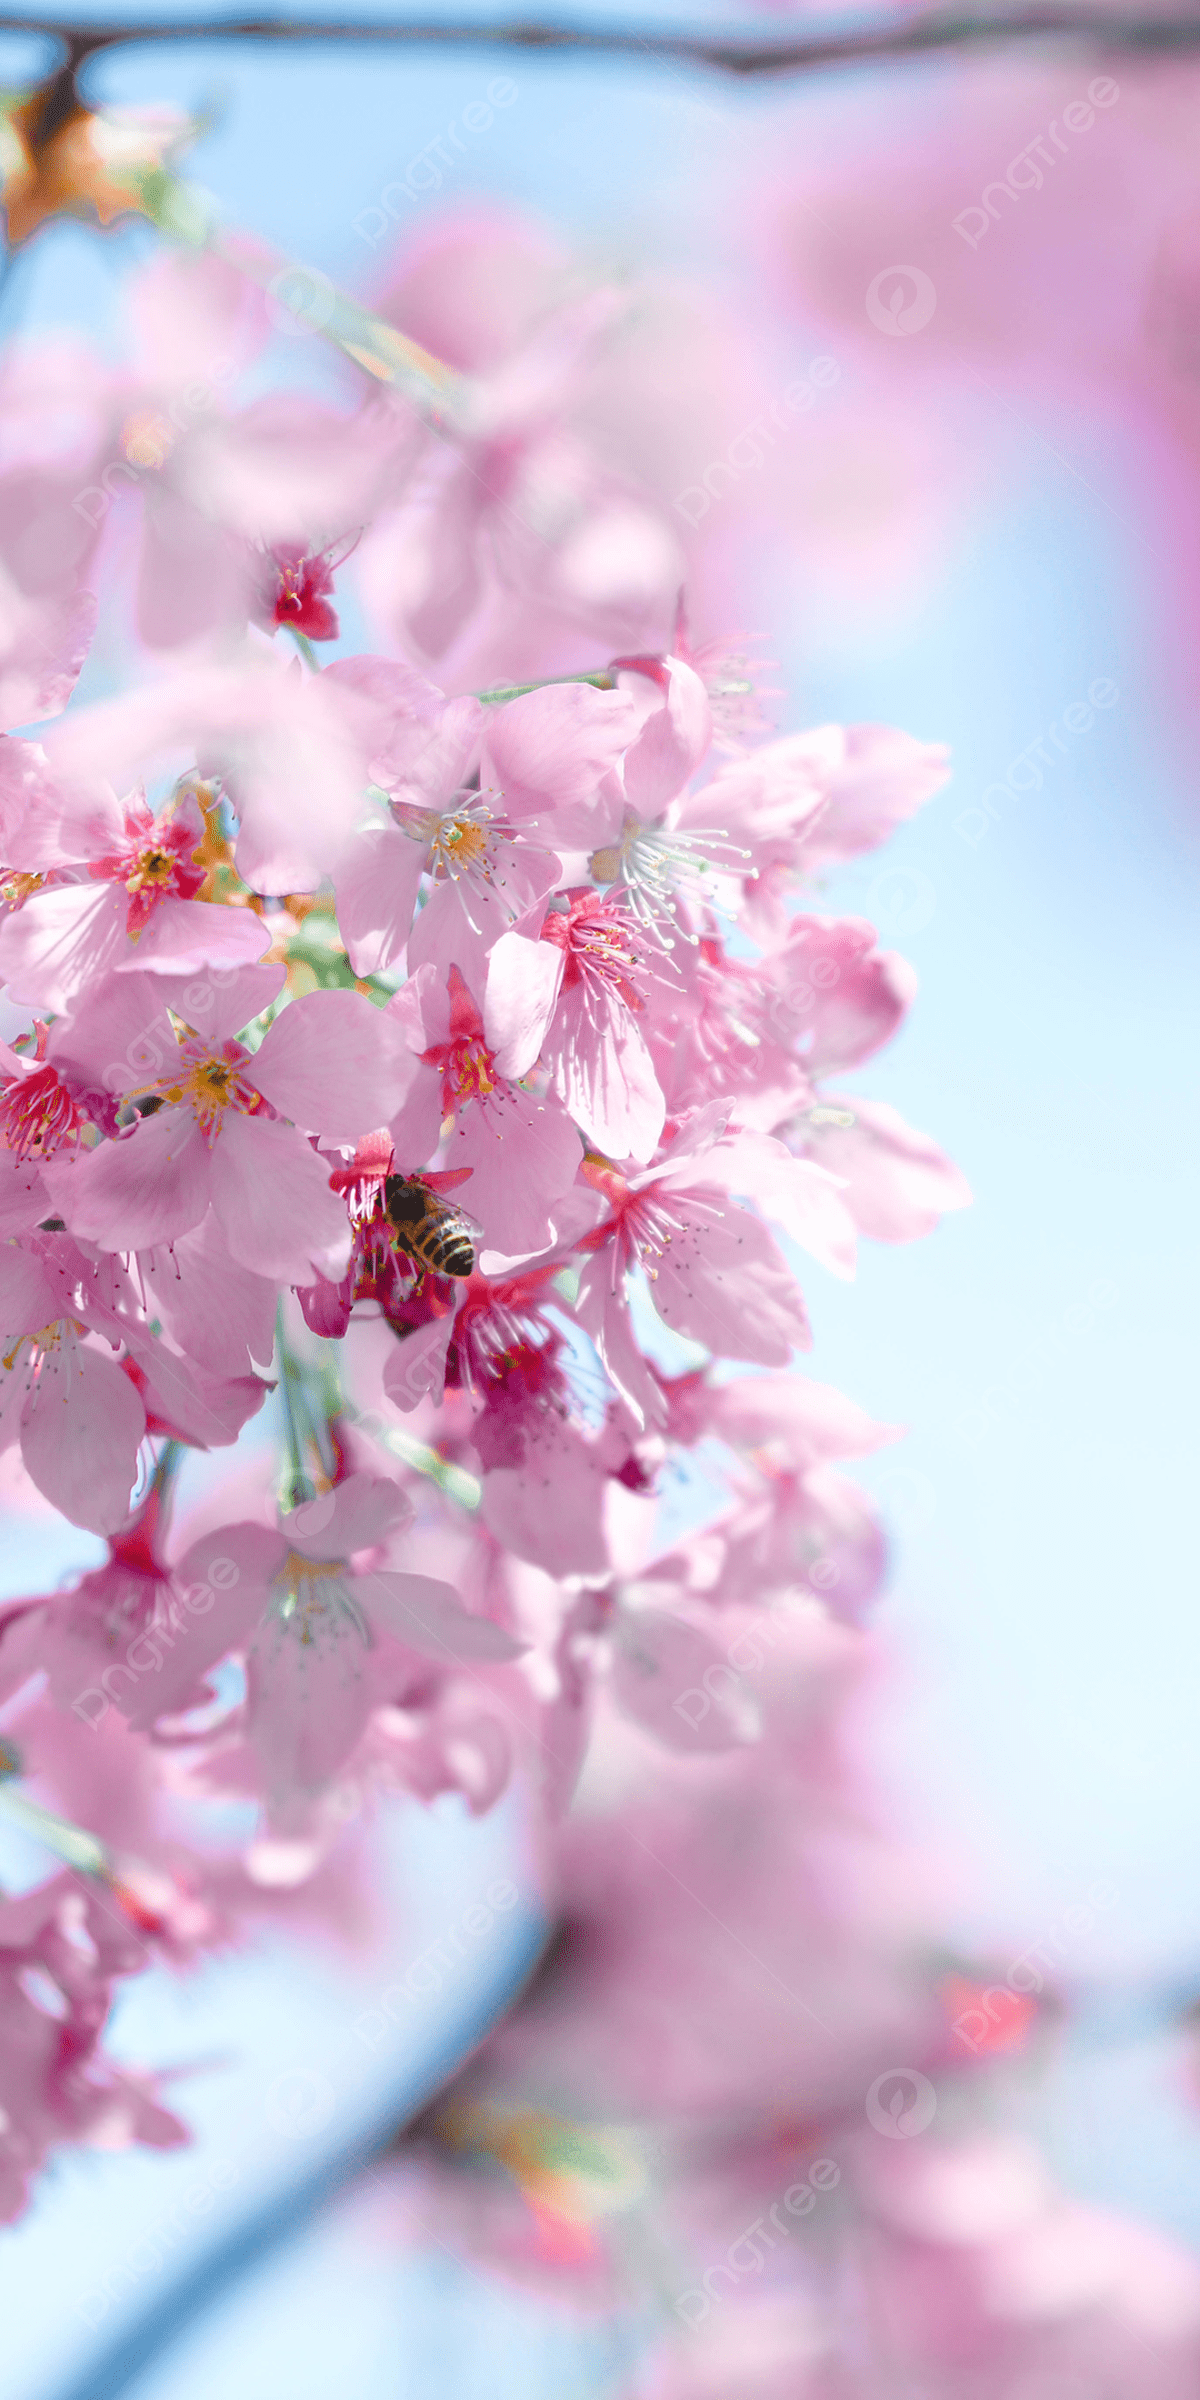 A close up of some pink flowers on tree - Cherry blossom